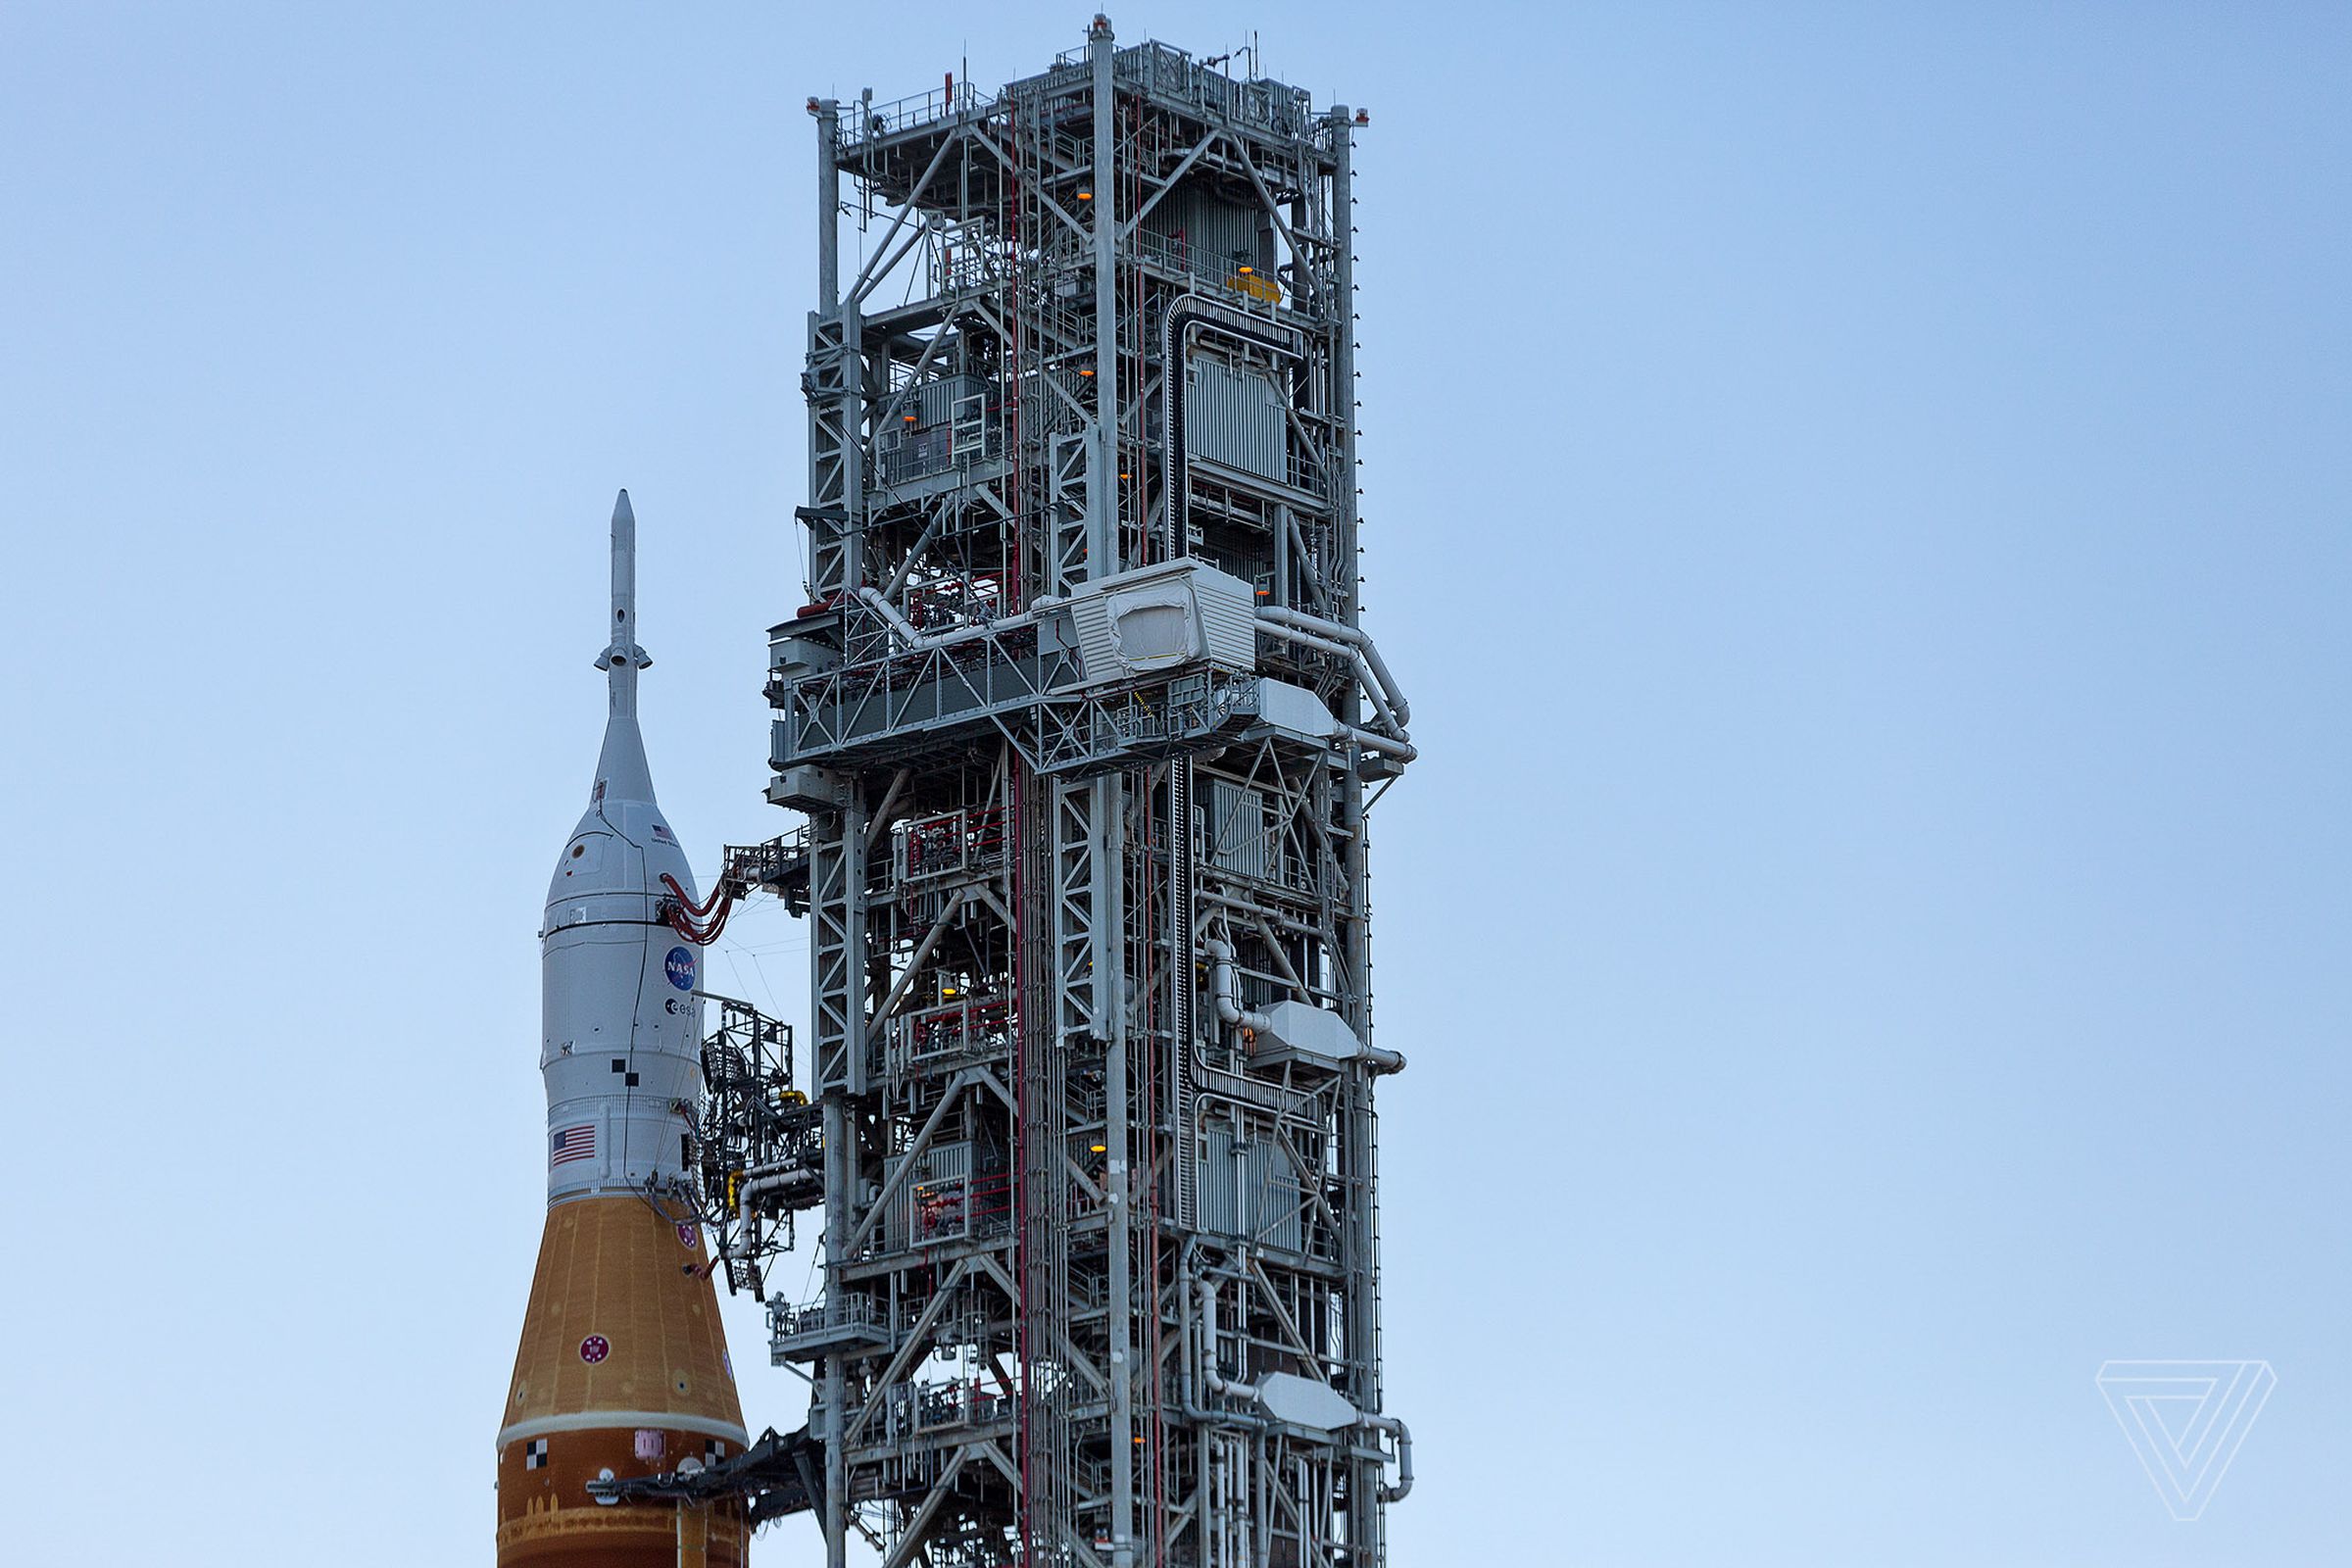 On top of the SLS is Orion, a new capsule designed to take humans into deep space.